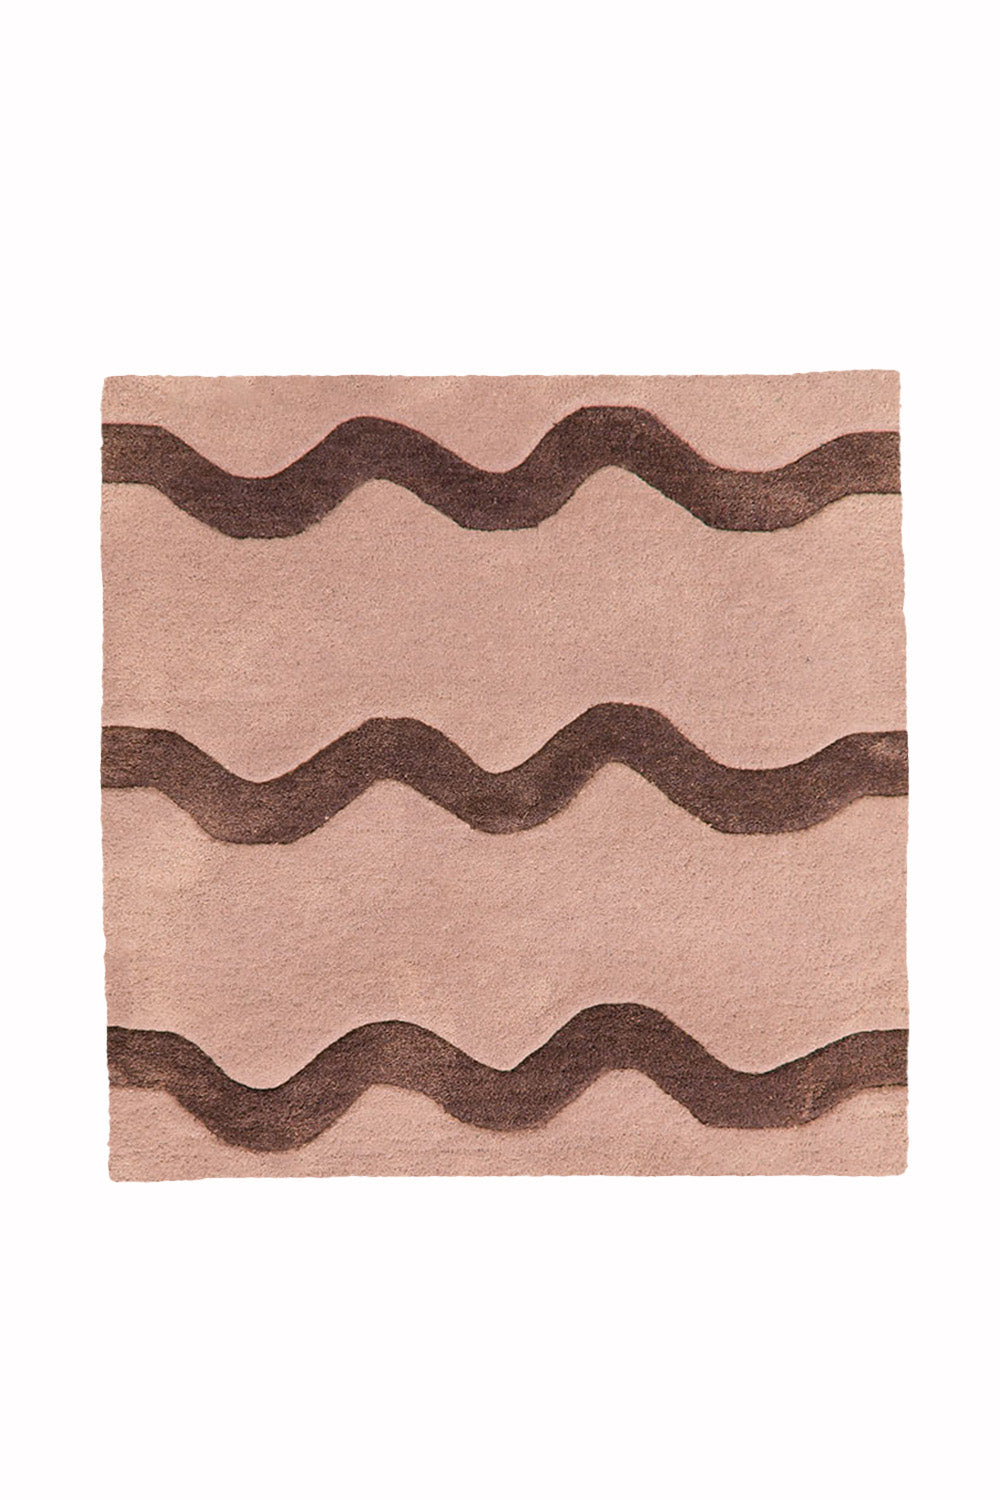 Squiggly Square Hand Tufted Wool Rug in Brown by Jubi